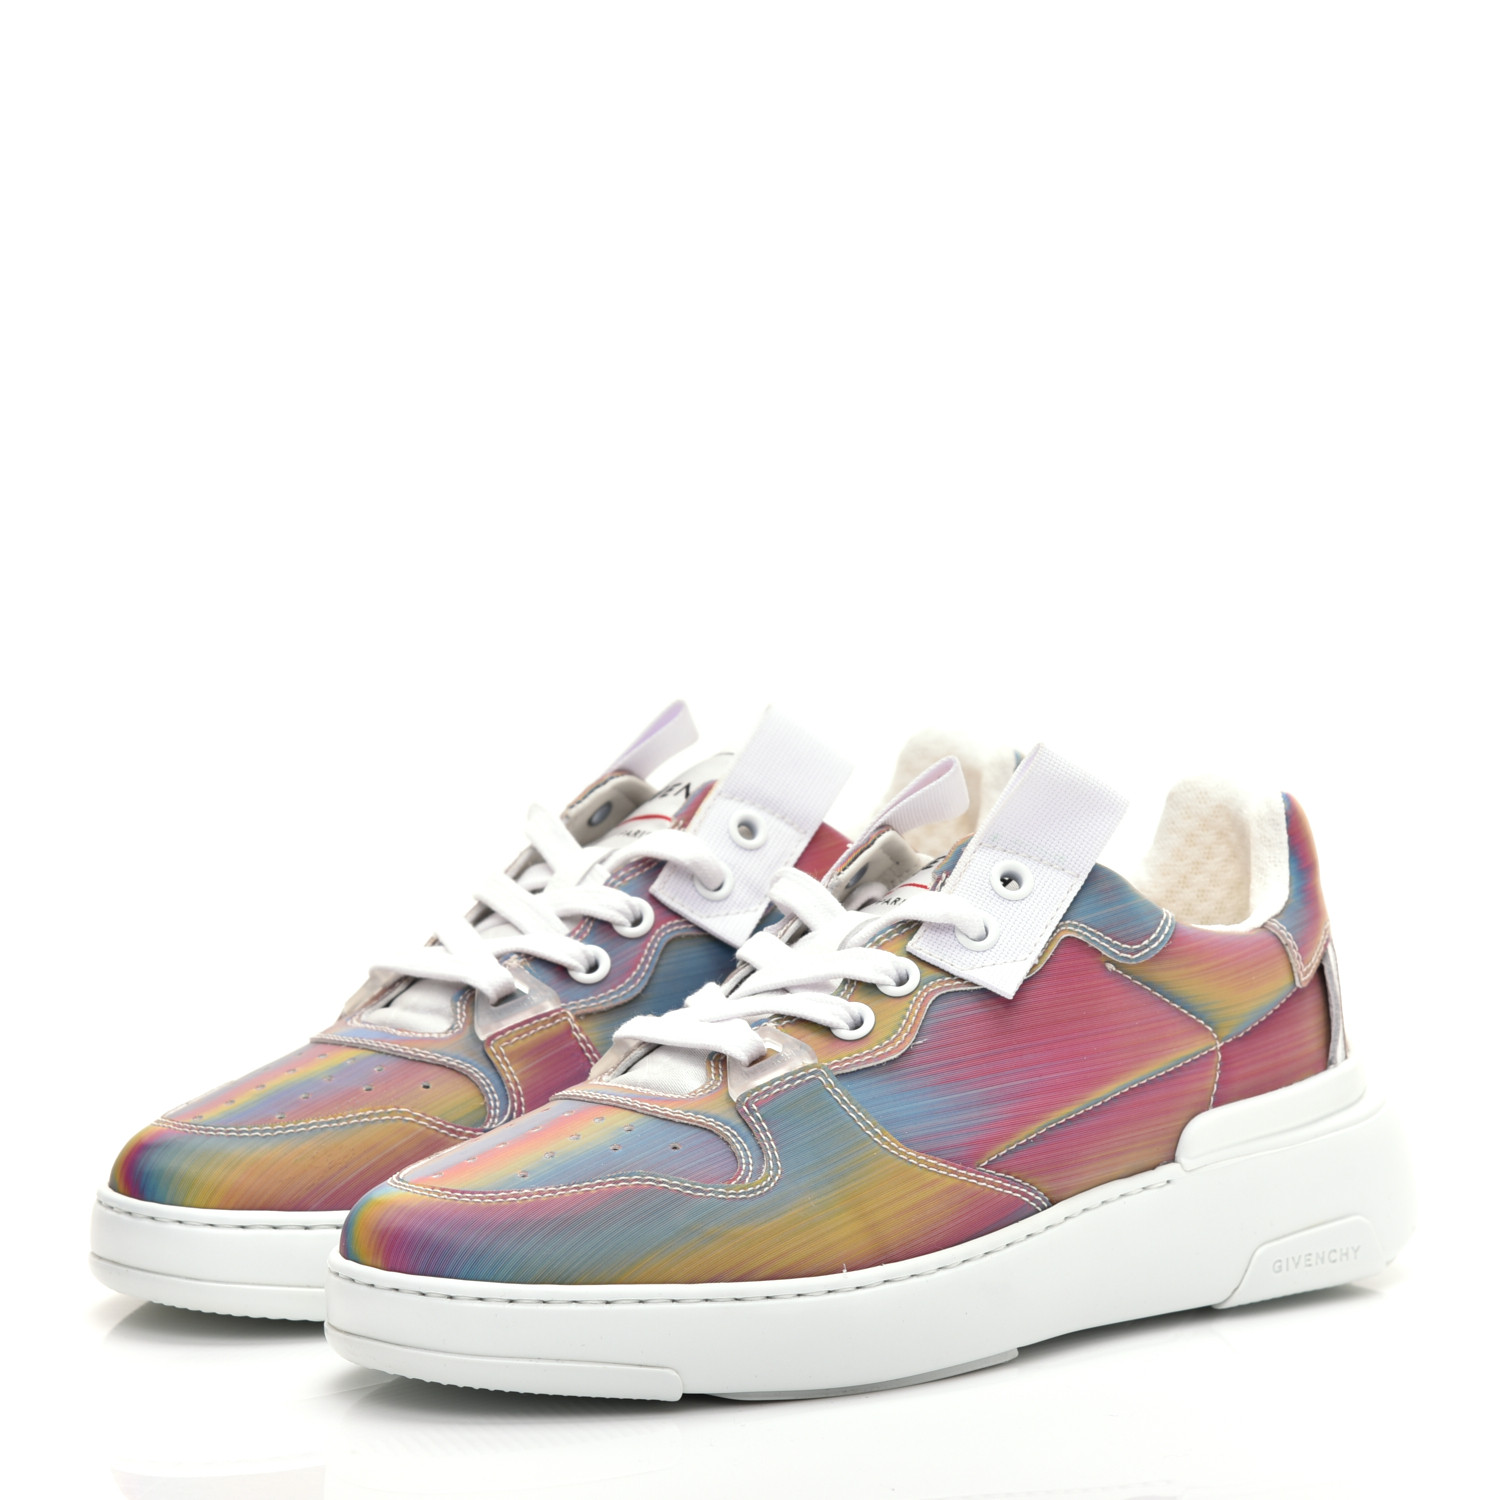 GIVENCHY Calfskin Wing Iridescent Low Top Sneakers 38.5 Multi 